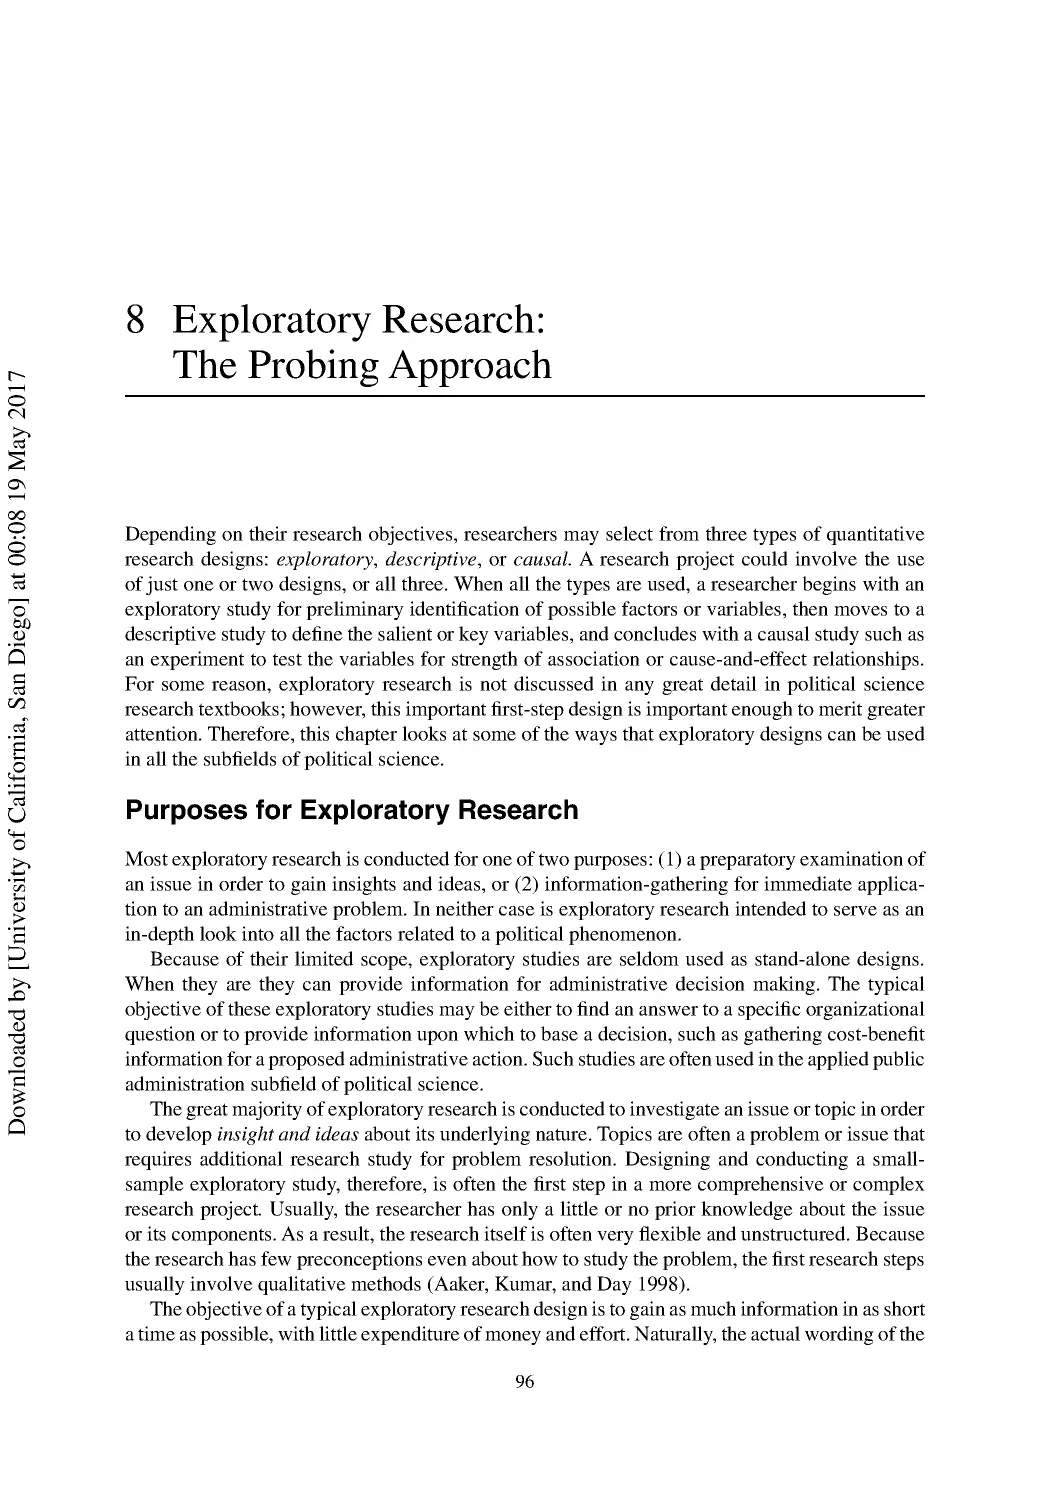 8 Exploratory Research: The Probing Approach